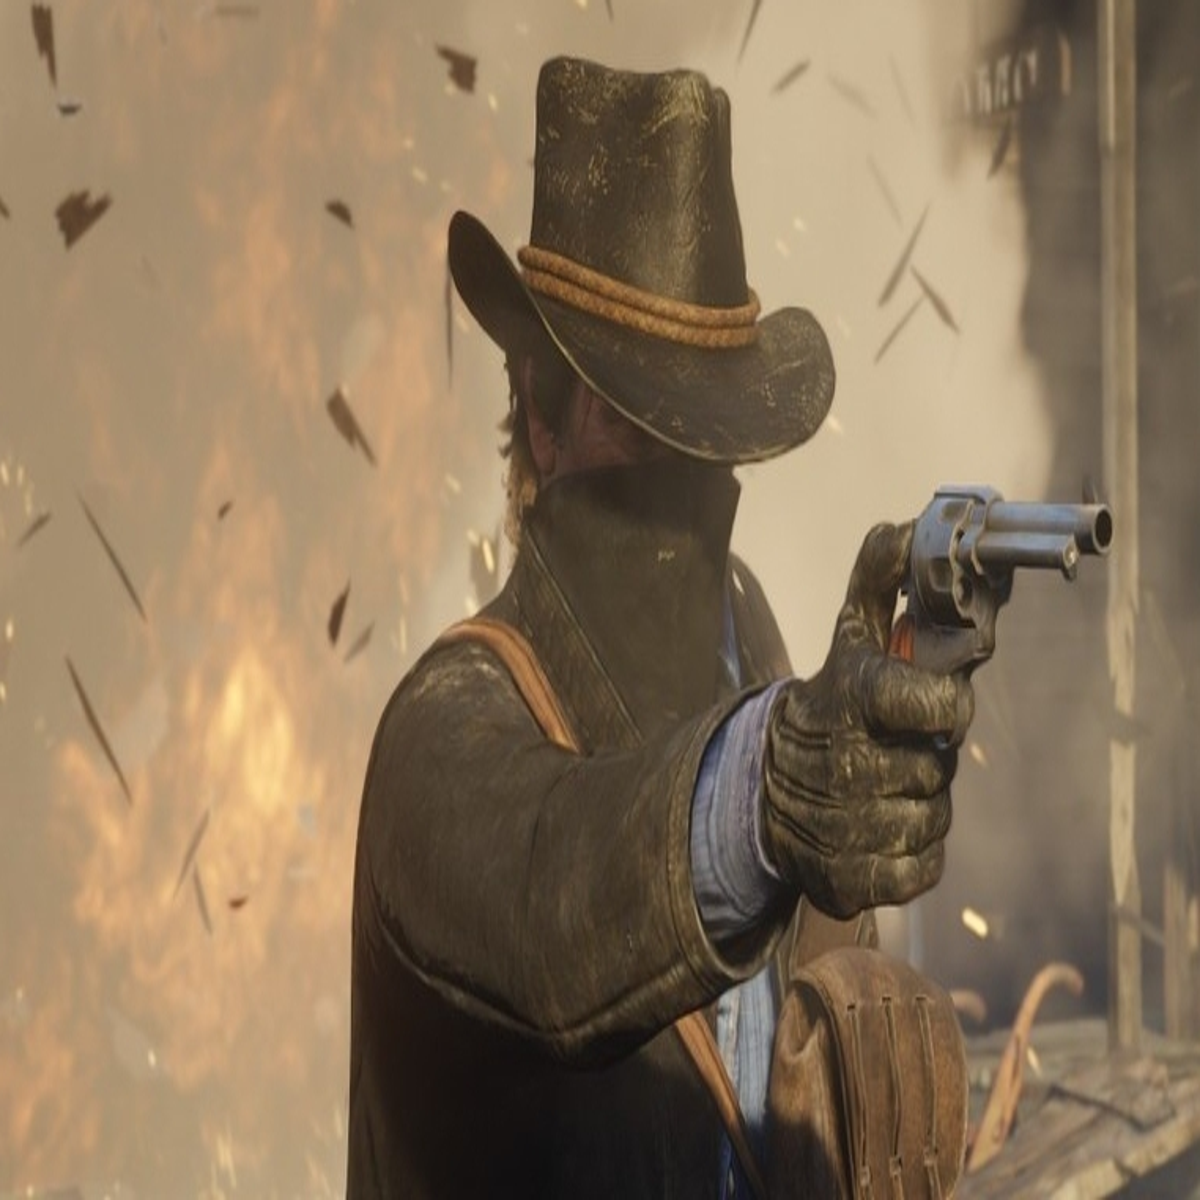 Red Dead Redemption 2: Rockstar explains why PC game had so many issues -  CNET